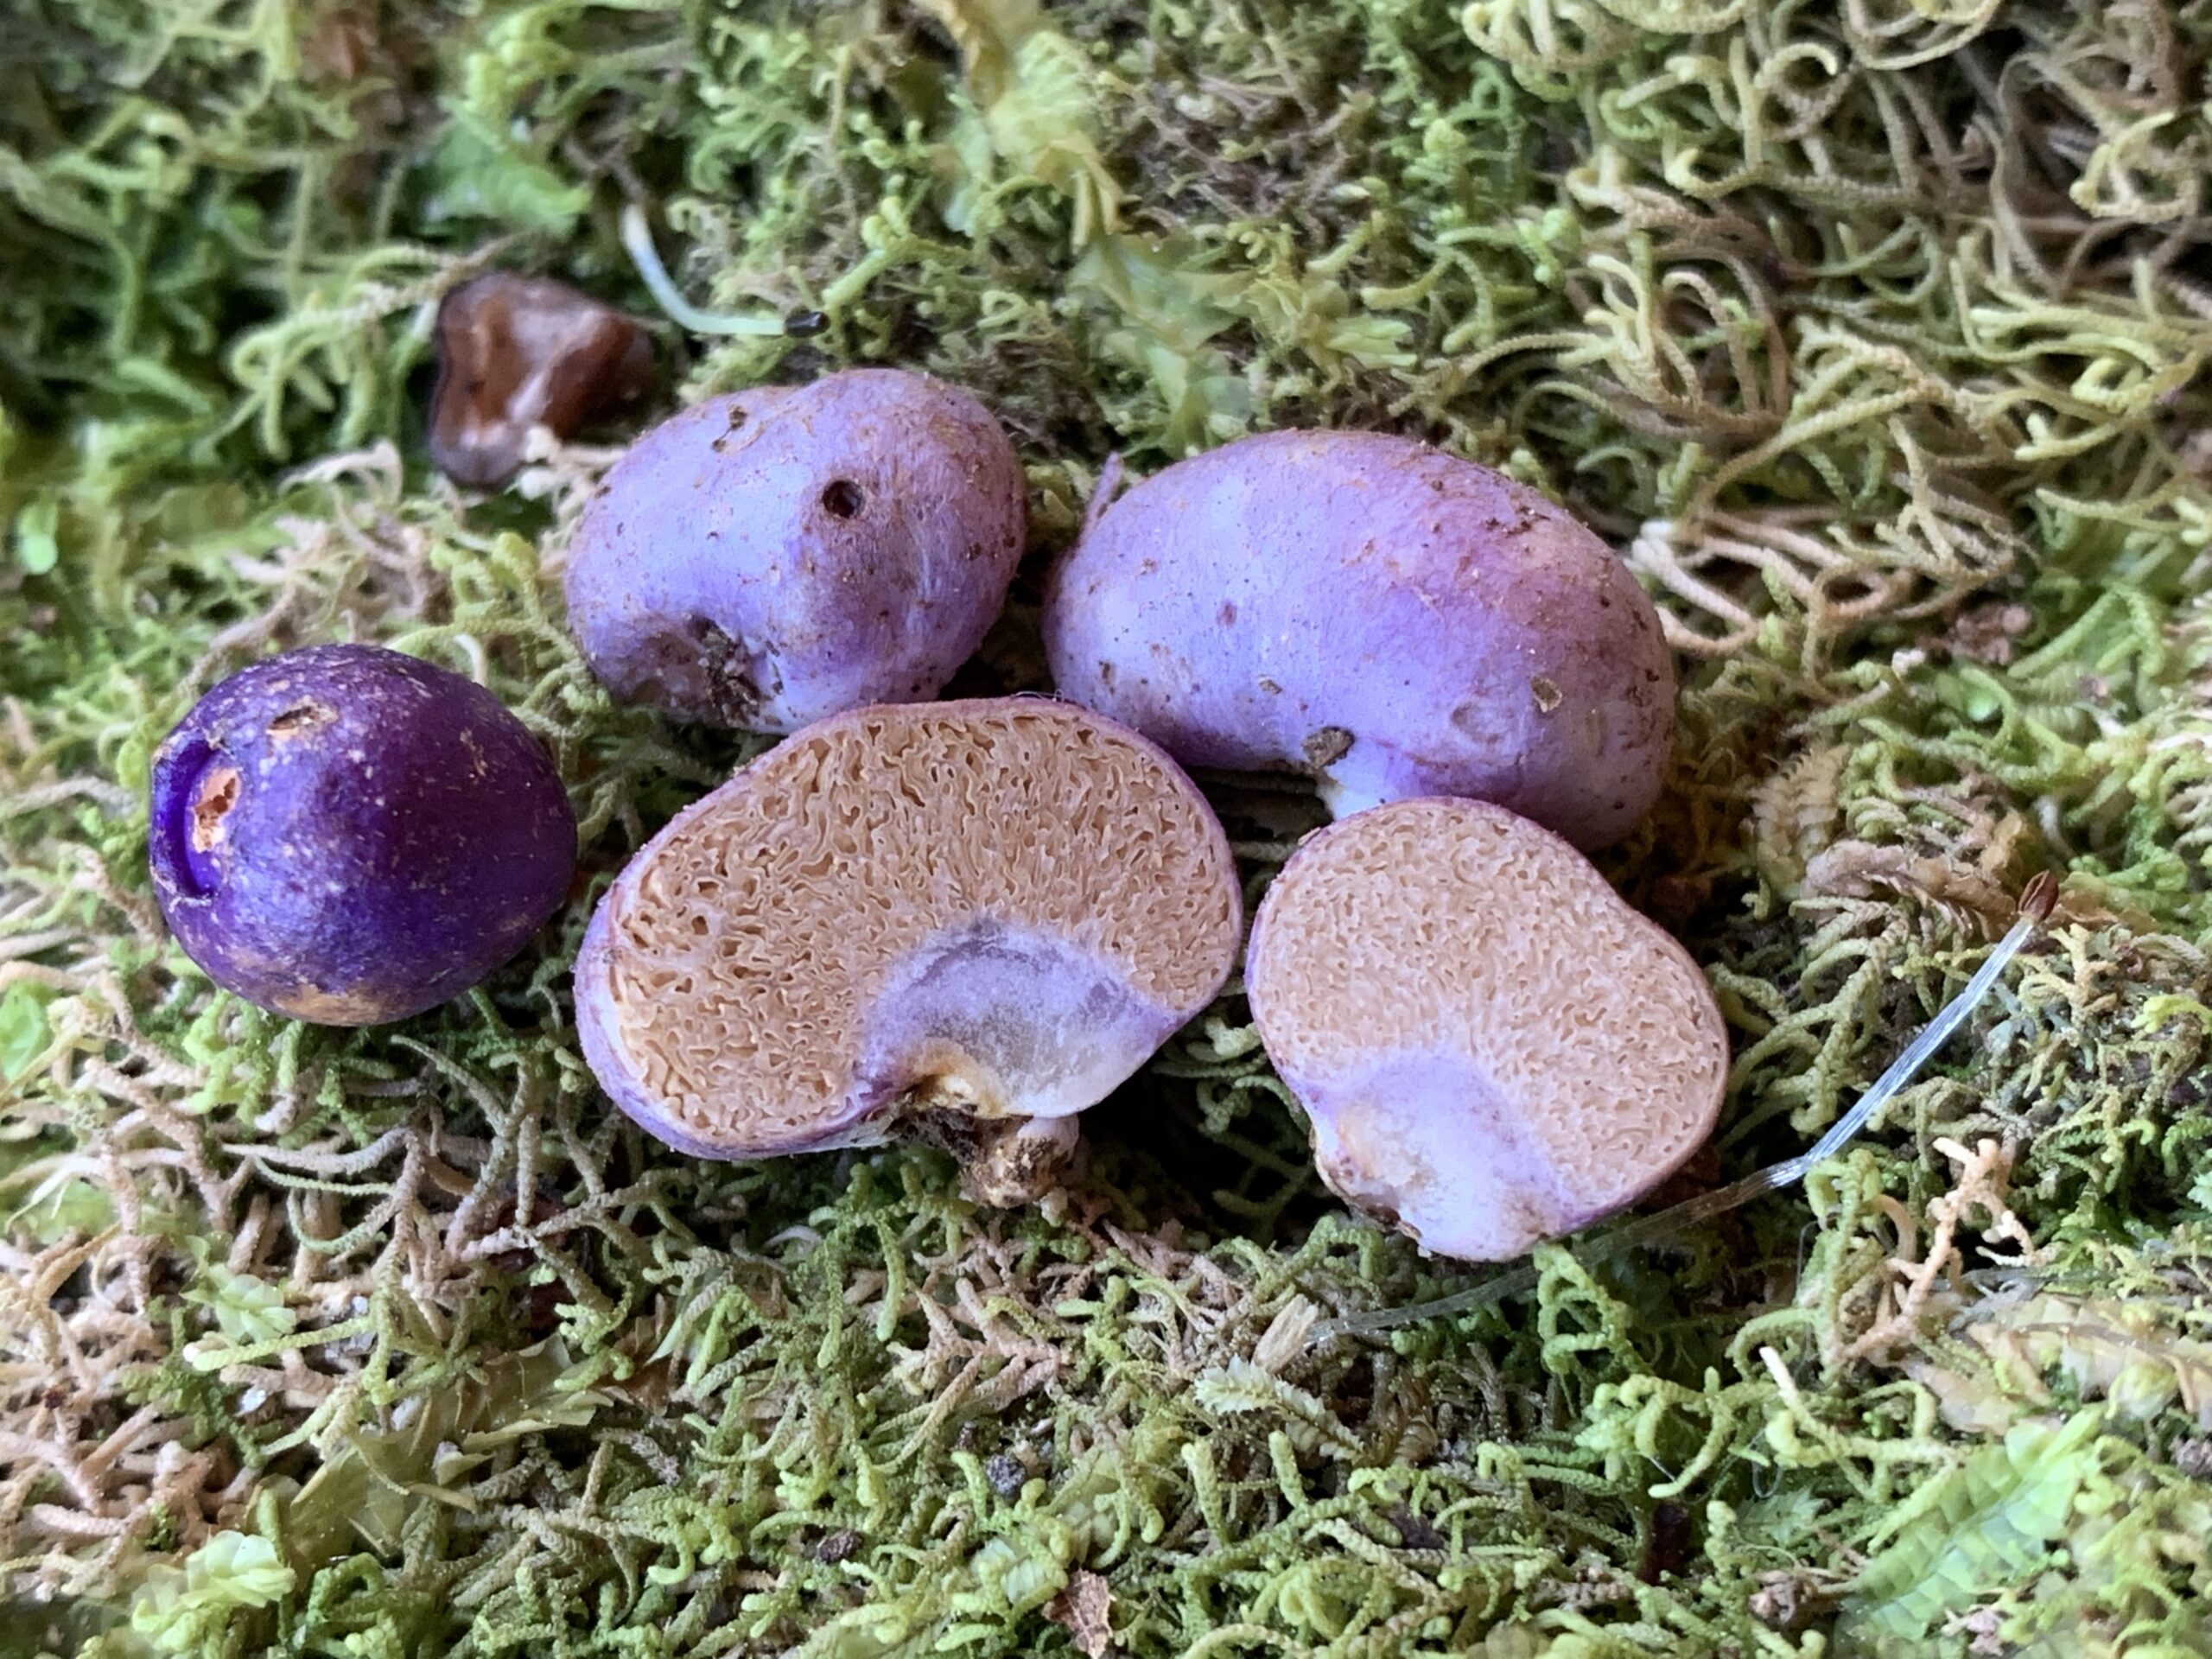 a small pile of purple-colored truffles on the ground next to a purple berry